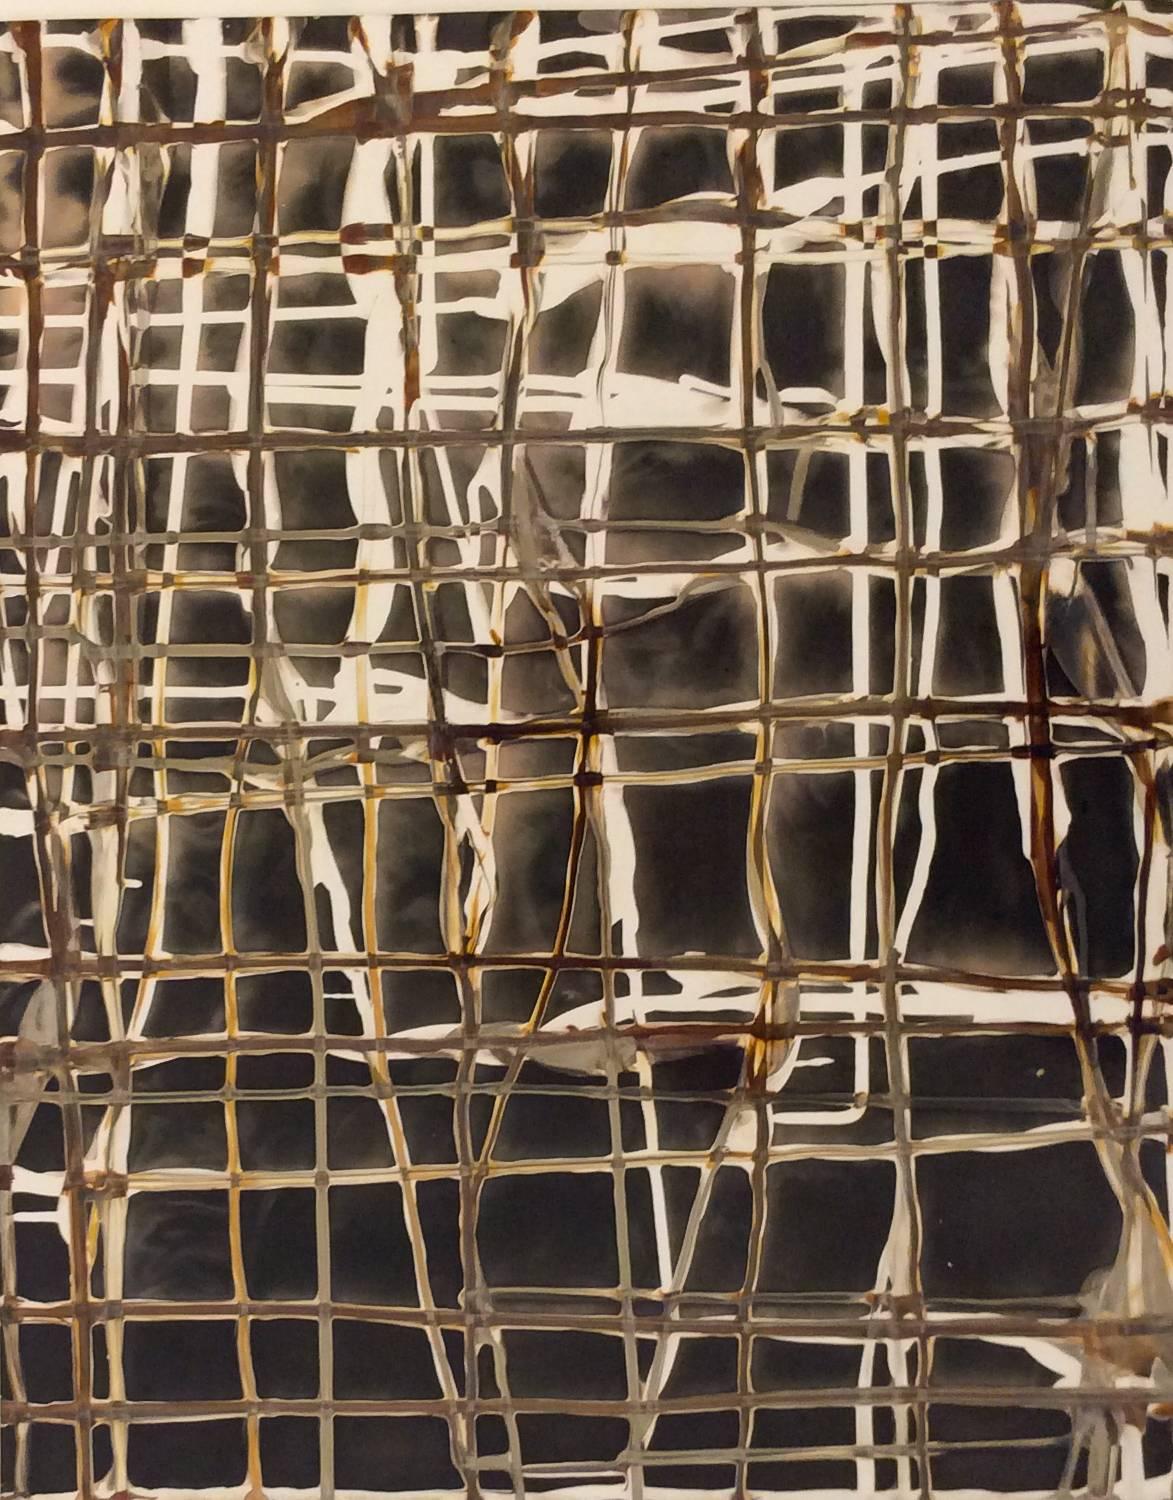 Birgit Blyth Abstract Photograph - Grid No. 207 (Modern, Abstract Camera-Less Photo in Toffee, Black, & Beige)